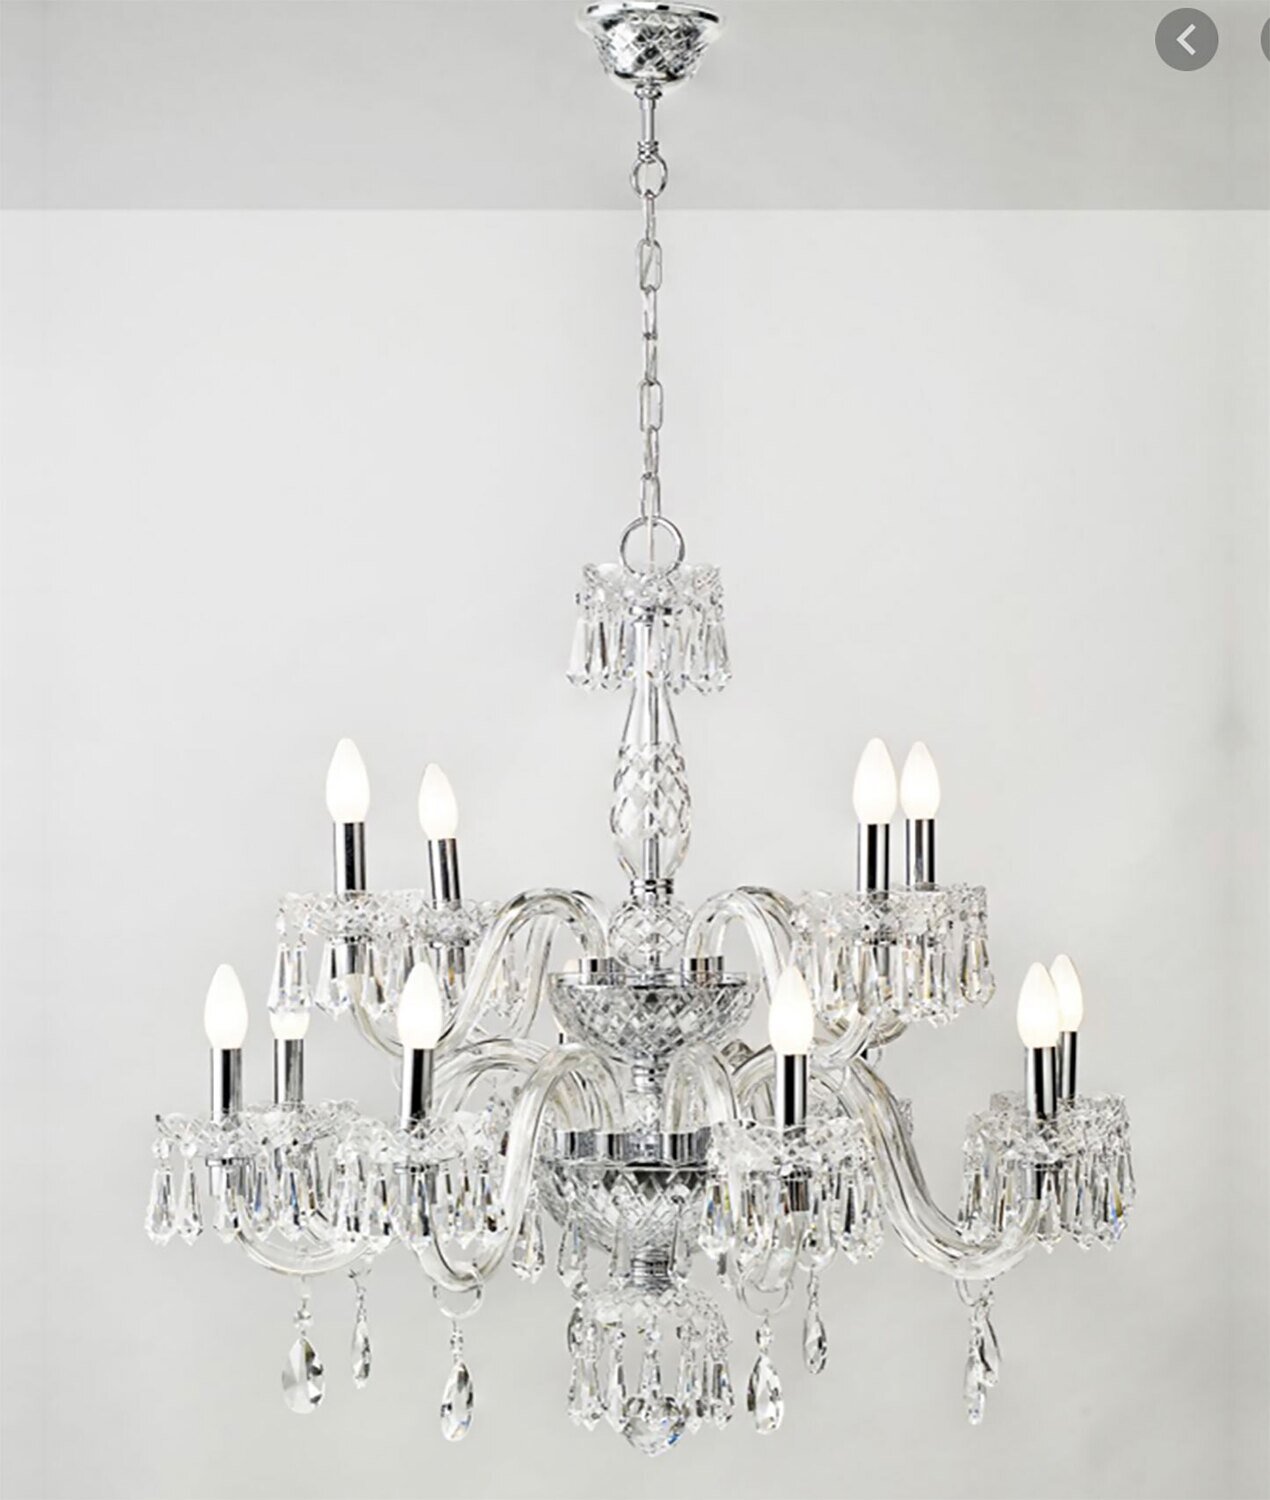 Vista Alegre Diamond Chandelier With 2 Levels and 12 Arms Black 48000372